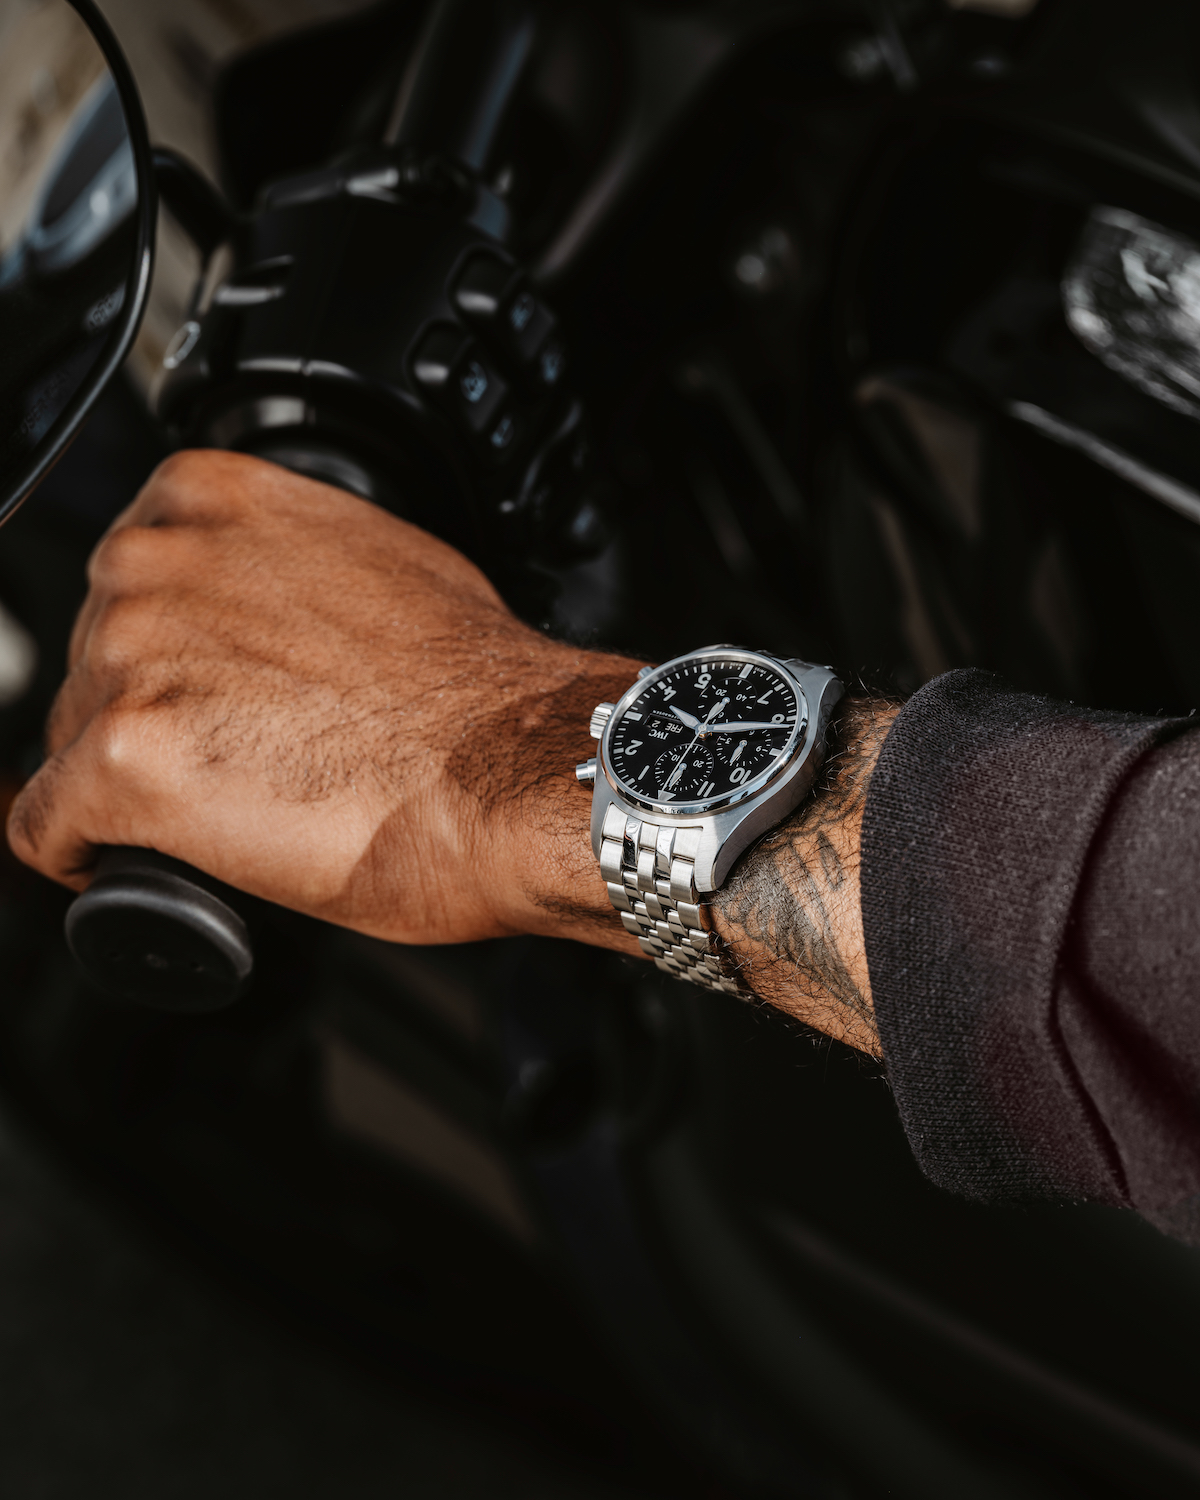 The C.03 collaborative Pilot's Watch Chronograph with IWC